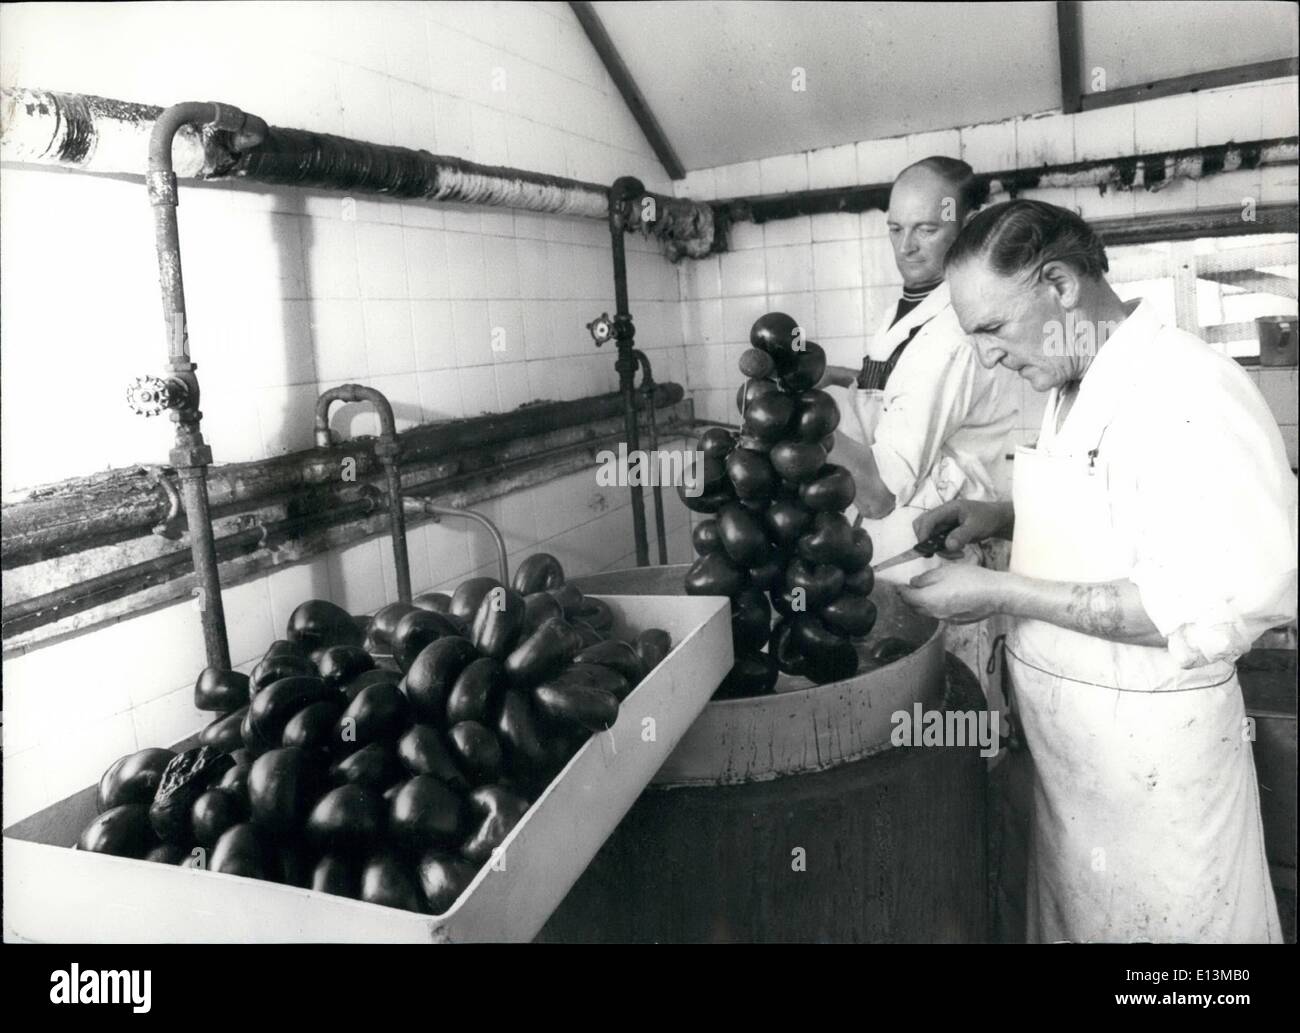 Mar. 02, 2012 - Walter Markey (right) who has to made over 200 tons of black pudding since he left school at the age of 12 works on what he hopes will the winner! Stock Photo